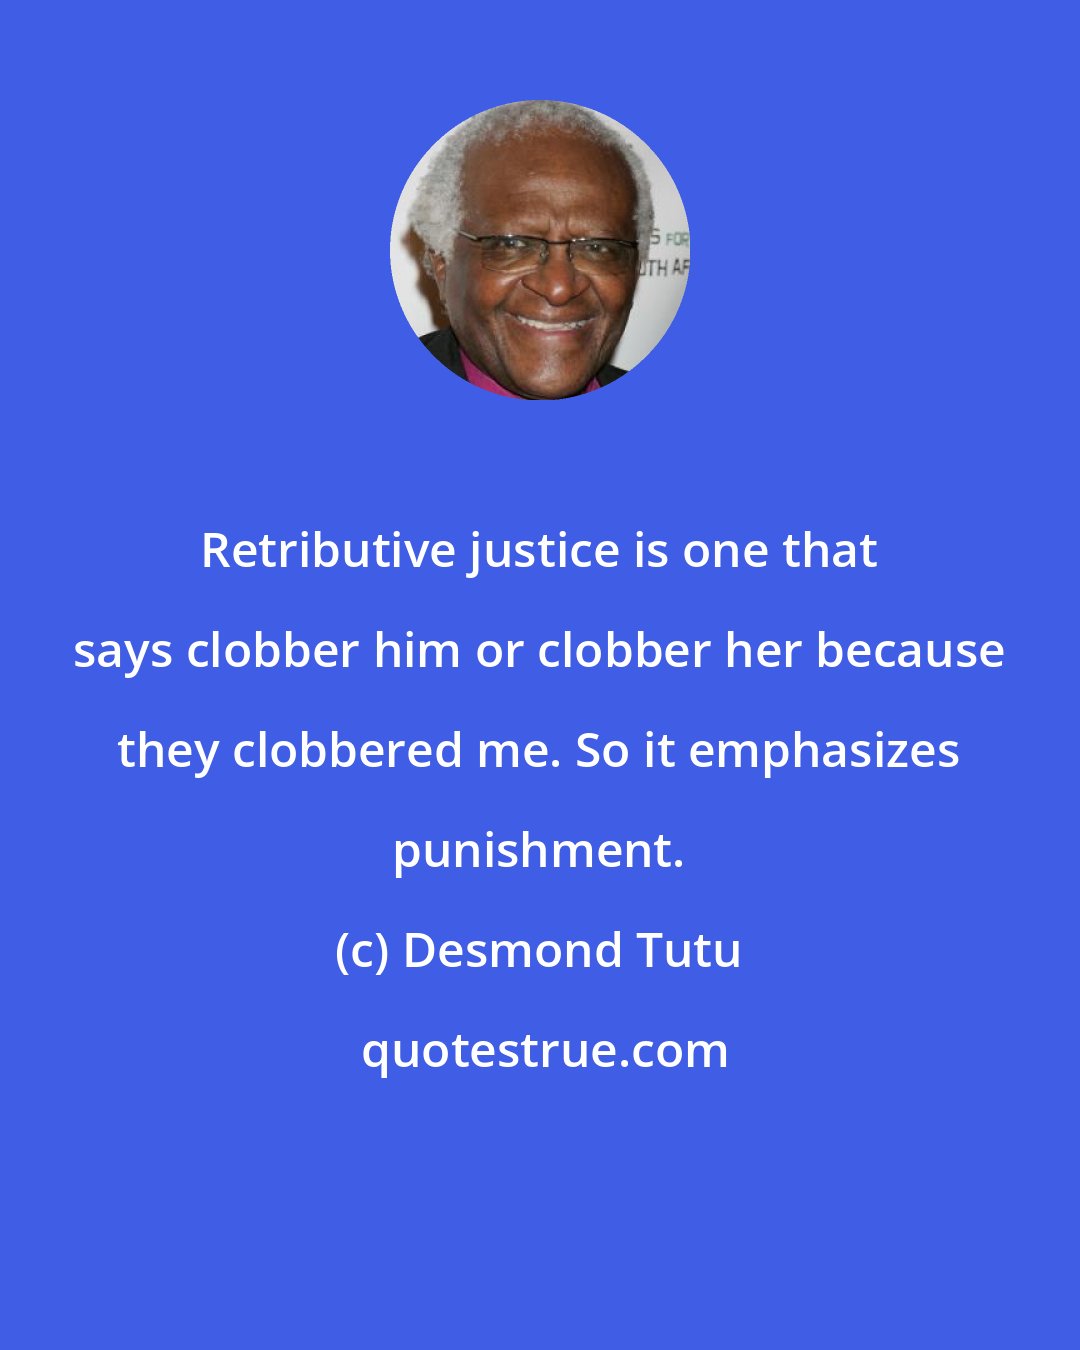 Desmond Tutu: Retributive justice is one that says clobber him or clobber her because they clobbered me. So it emphasizes punishment.